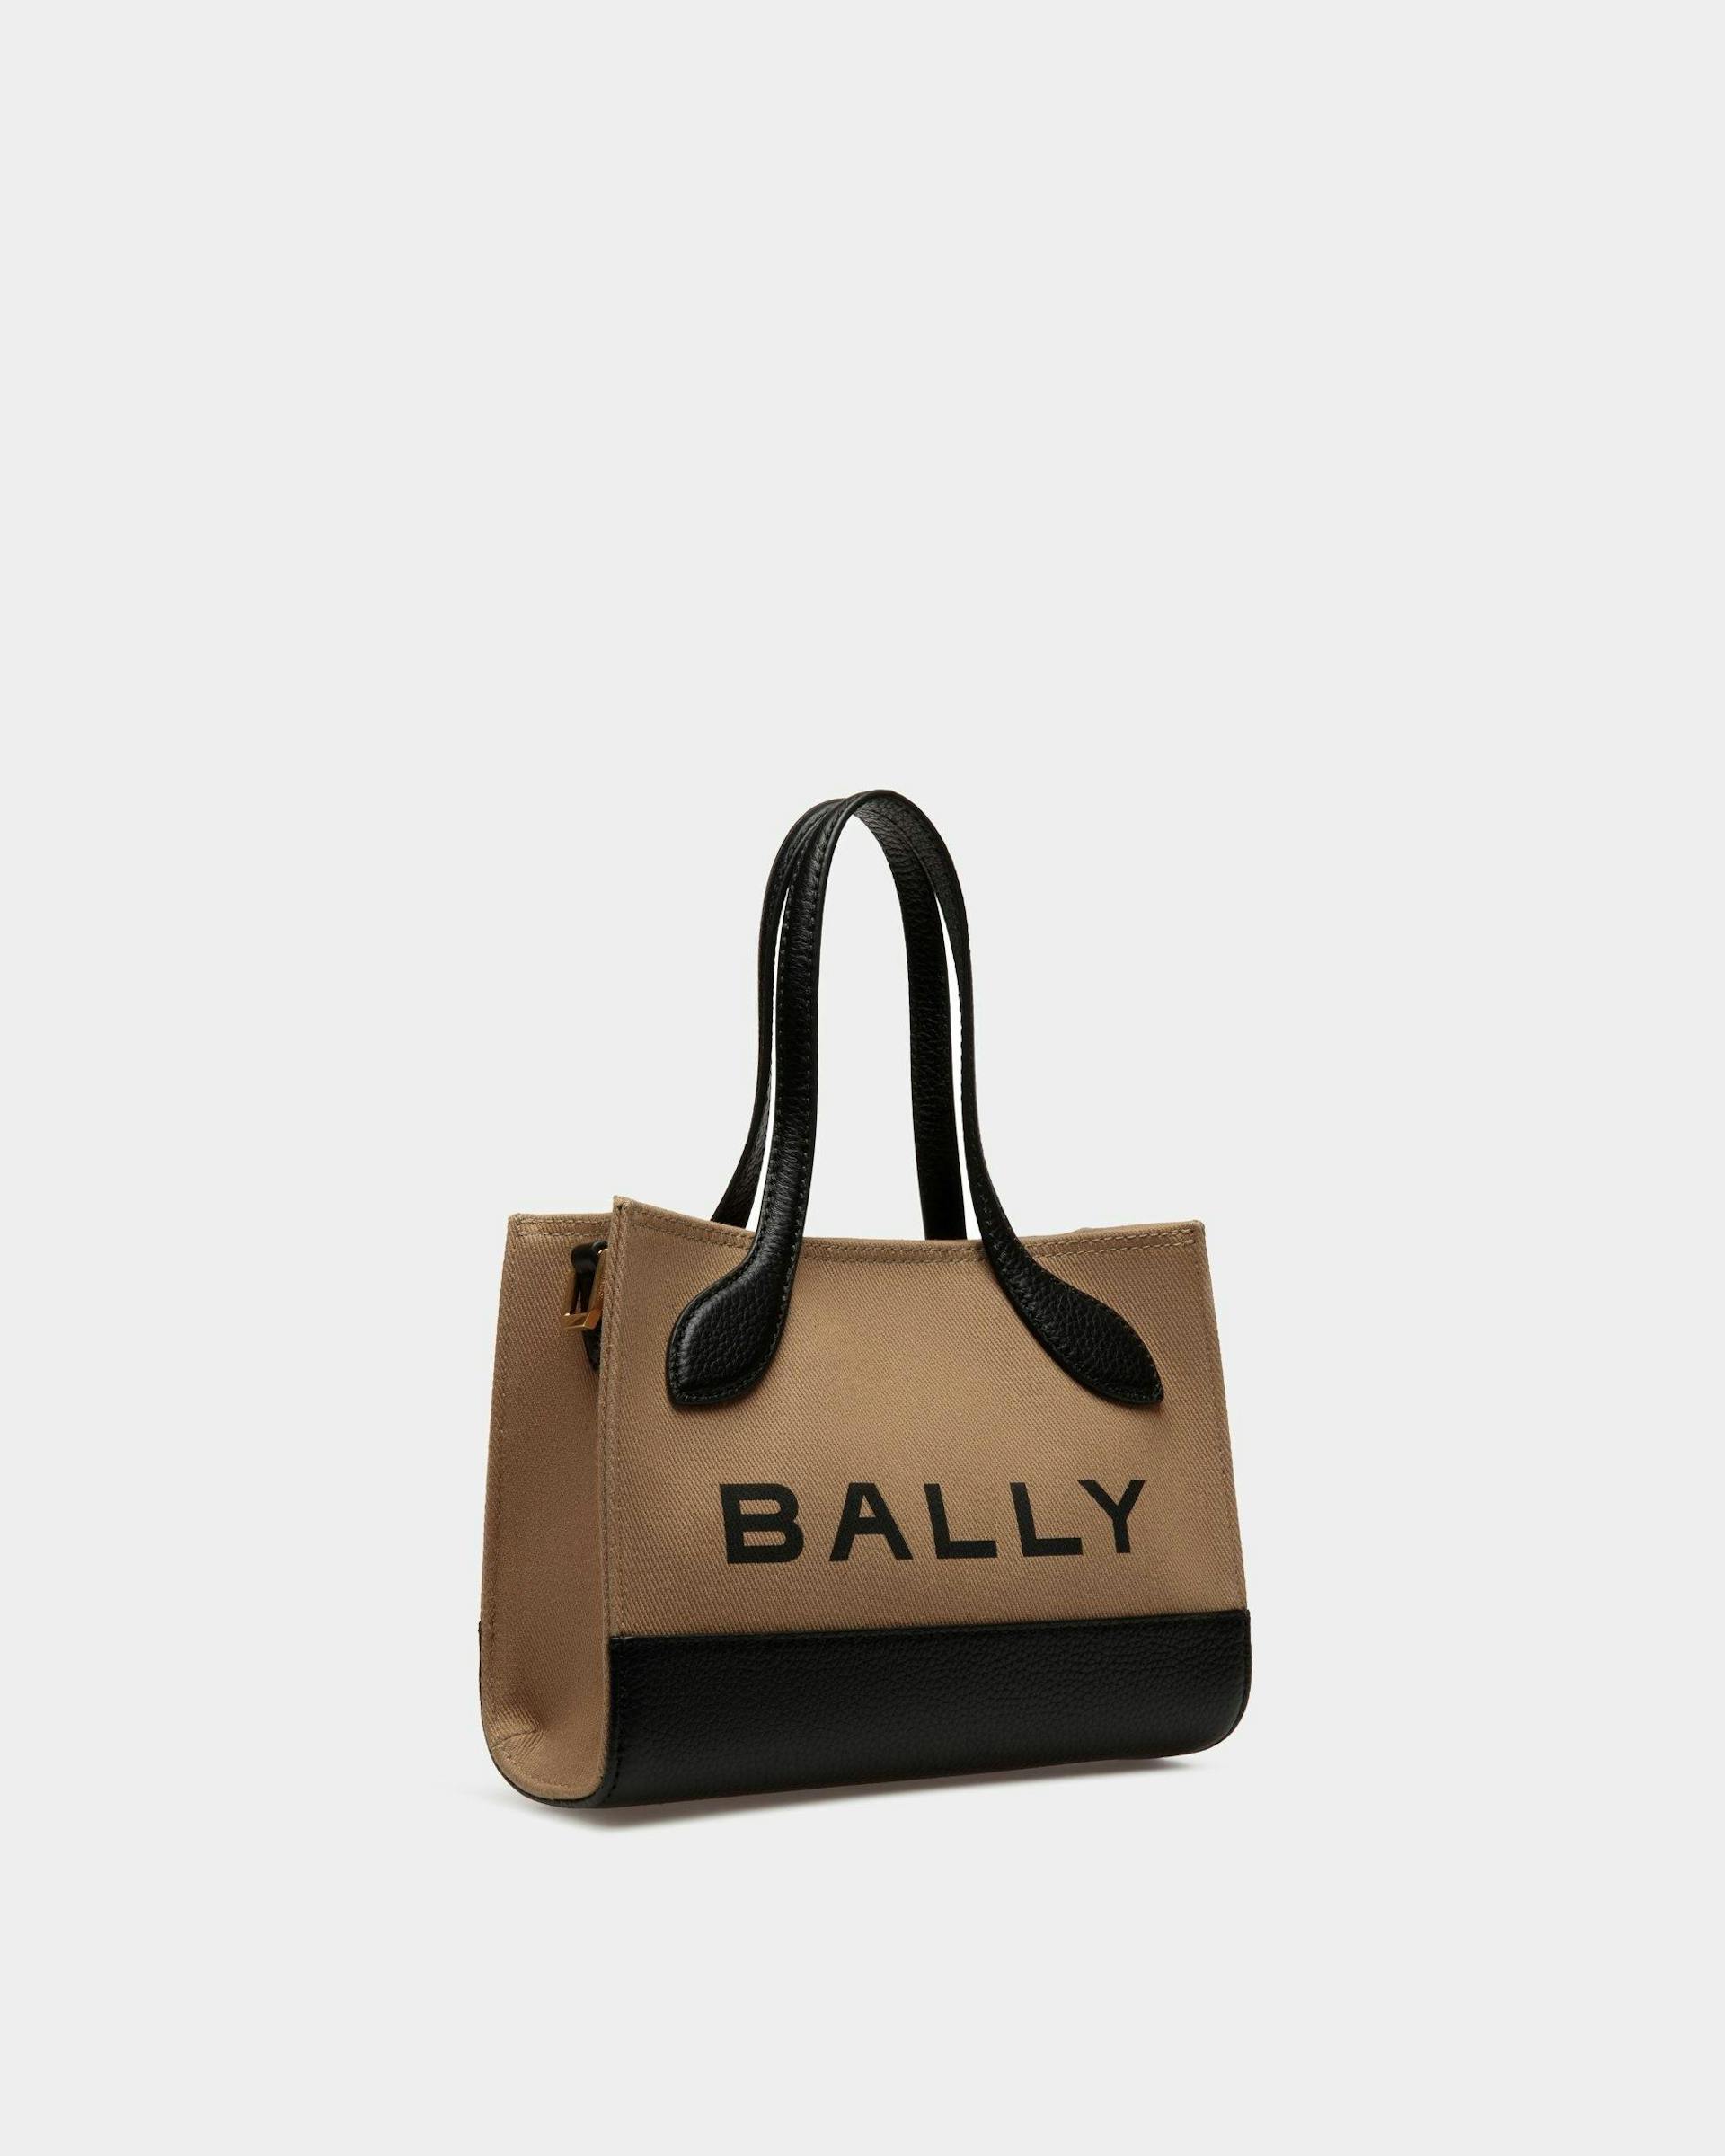 Bar Minibag In Sand And Black Fabric - Women's - Bally - 04